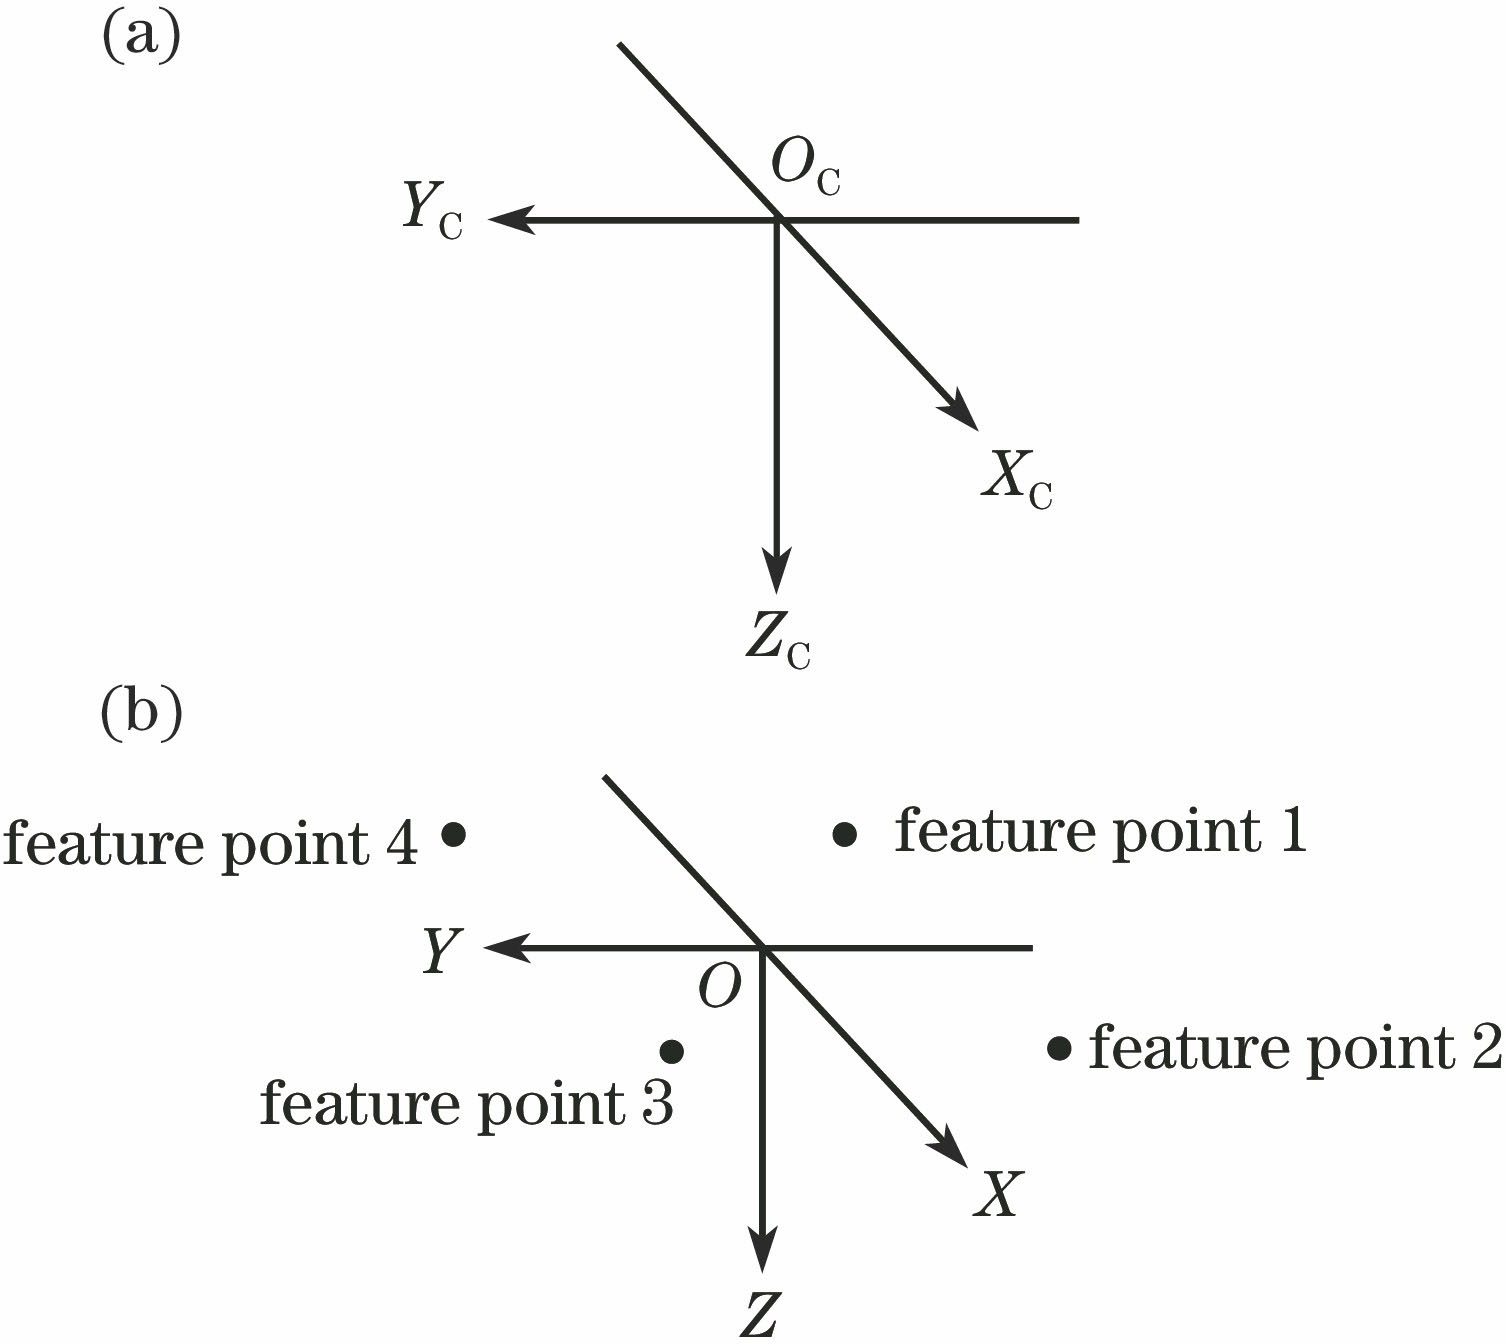 Definition of coordinate system. (a) Camera coordinate system; (b) target coordinate system